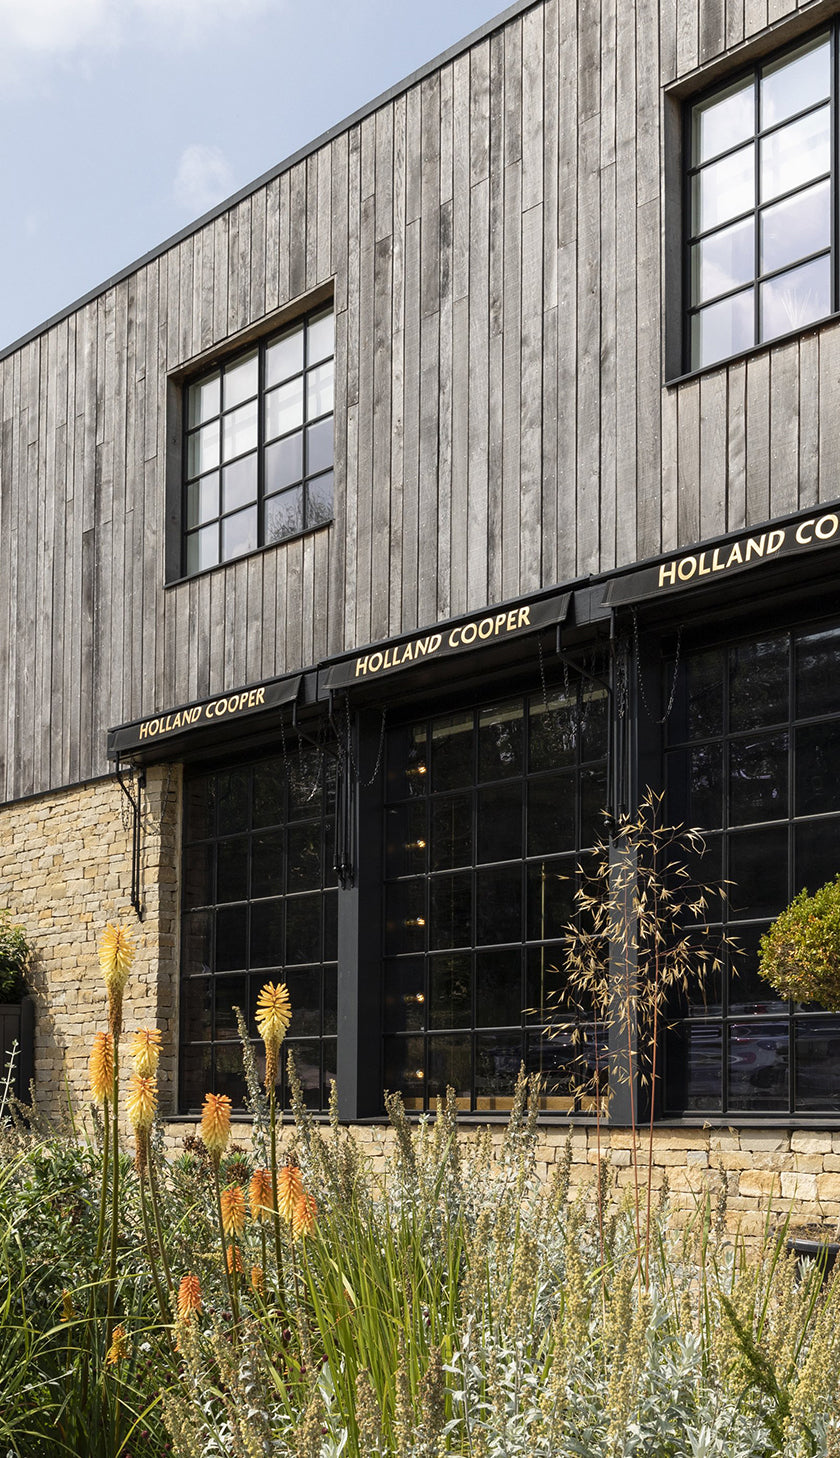 Holland Cooper Womens Boutique Store with gold lettering and cotswold yellow stone building with black glass windows